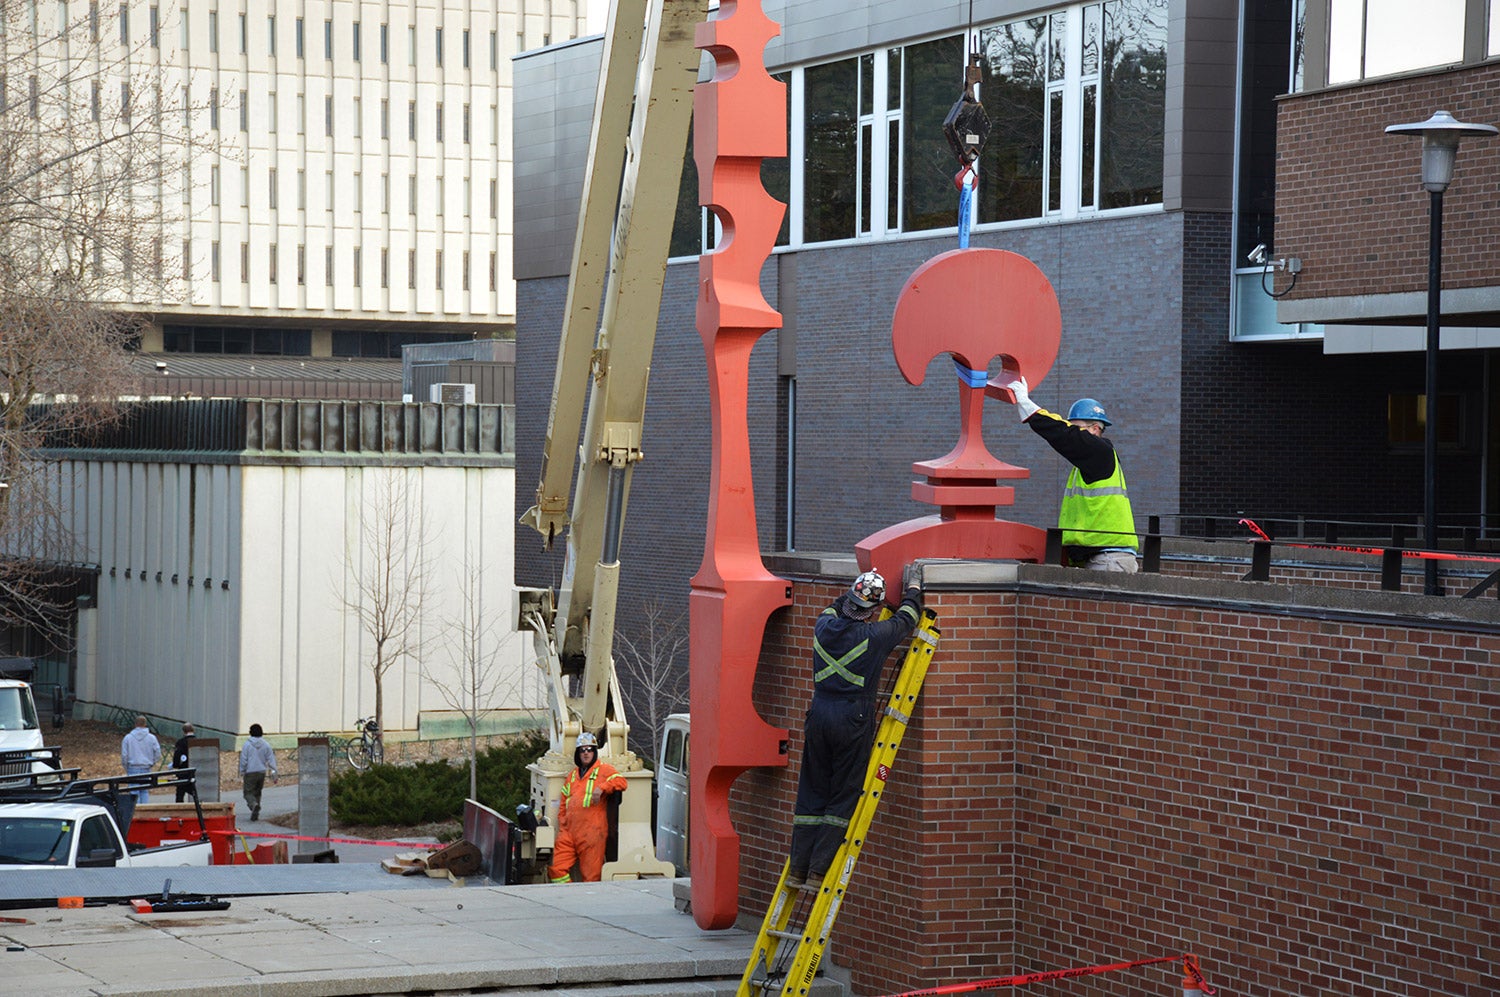 construction workers detach the sculpture from the wall